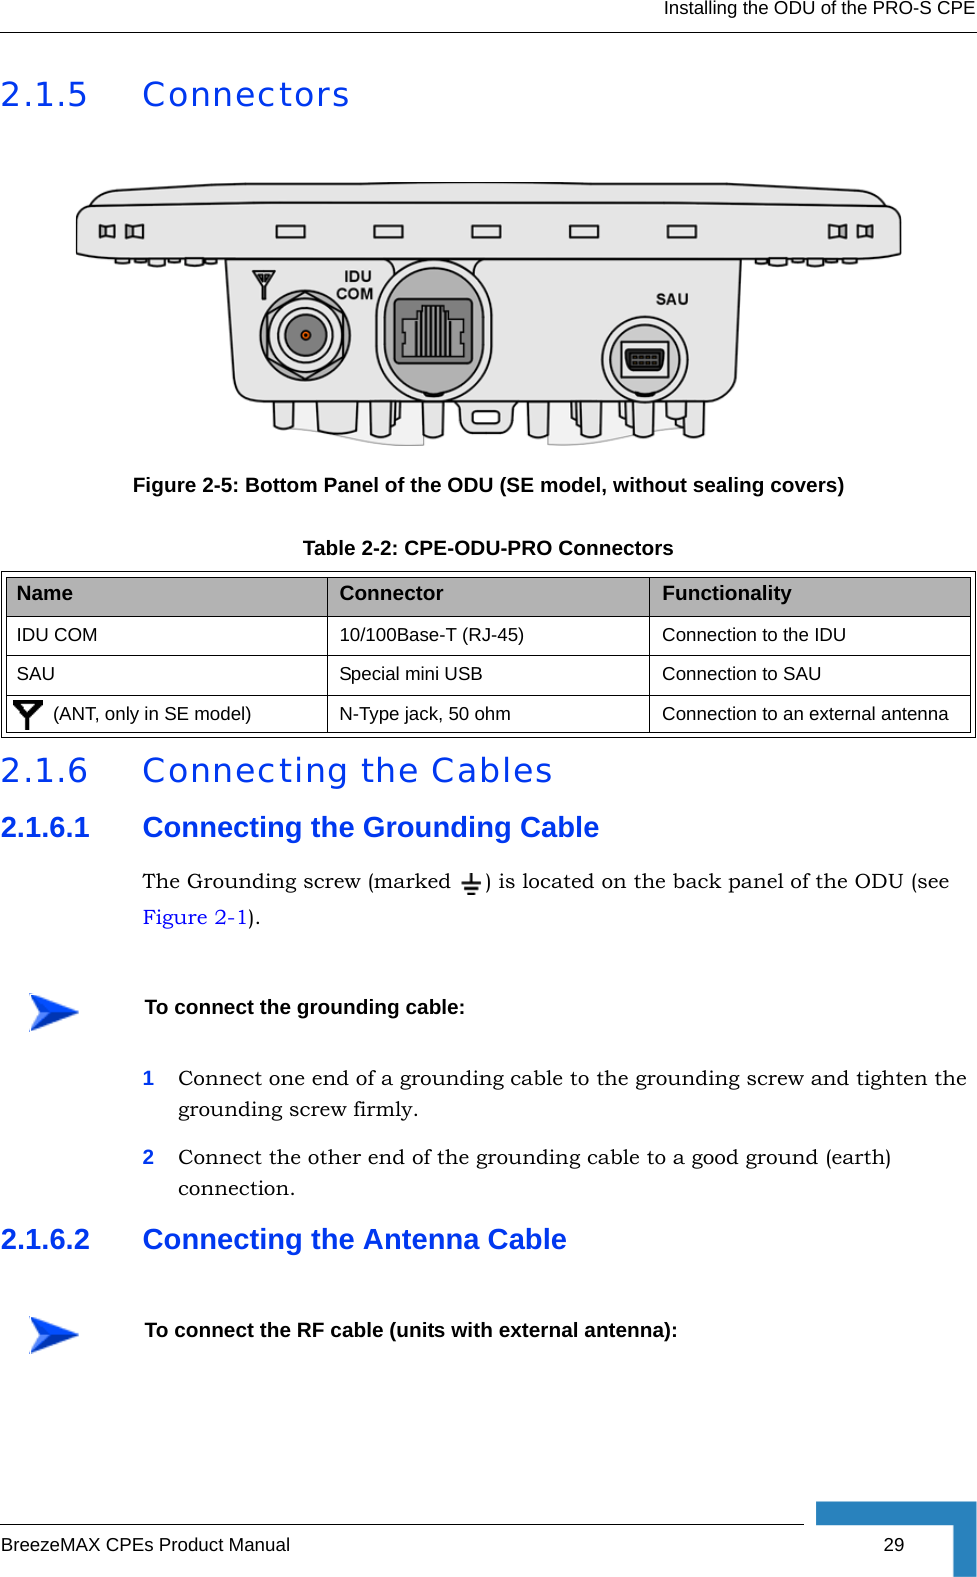 Installing the ODU of the PRO-S CPEBreezeMAX CPEs Product Manual 292.1.5 Connectors2.1.6 Connecting the Cables2.1.6.1 Connecting the Grounding CableThe Grounding screw (marked  ) is located on the back panel of the ODU (see Figure 2-1).1Connect one end of a grounding cable to the grounding screw and tighten the grounding screw firmly. 2Connect the other end of the grounding cable to a good ground (earth) connection.2.1.6.2 Connecting the Antenna CableFigure 2-5: Bottom Panel of the ODU (SE model, without sealing covers)Table 2-2: CPE-ODU-PRO ConnectorsName Connector FunctionalityIDU COM 10/100Base-T (RJ-45) Connection to the IDUSAU Special mini USB Connection to SAU       (ANT, only in SE model) N-Type jack, 50 ohm Connection to an external antennaTo connect the grounding cable:To connect the RF cable (units with external antenna):